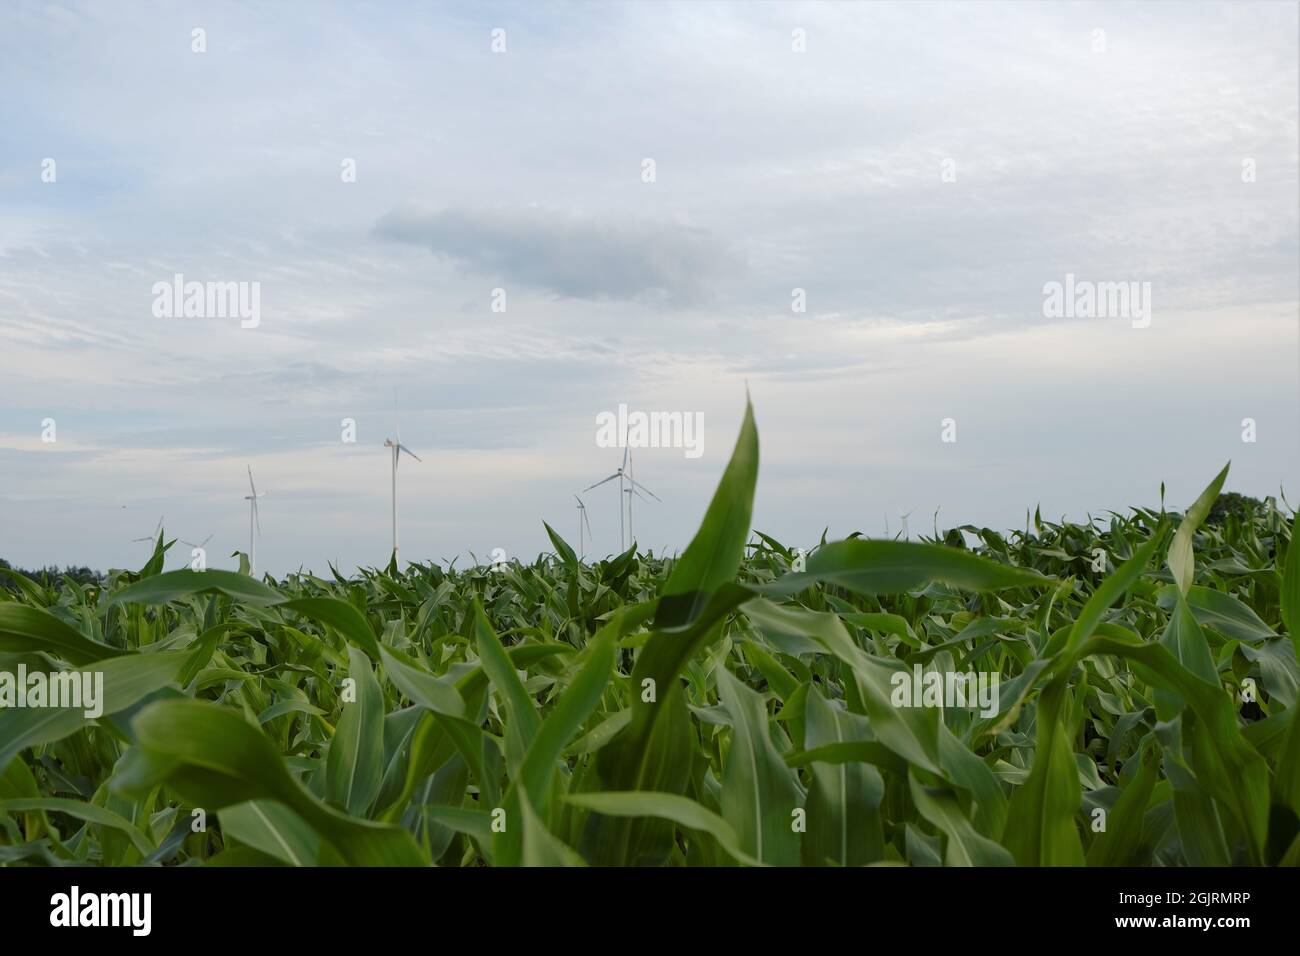 Wind energy.Wind turbines in a field. Alternative energy sources. Stock Photo